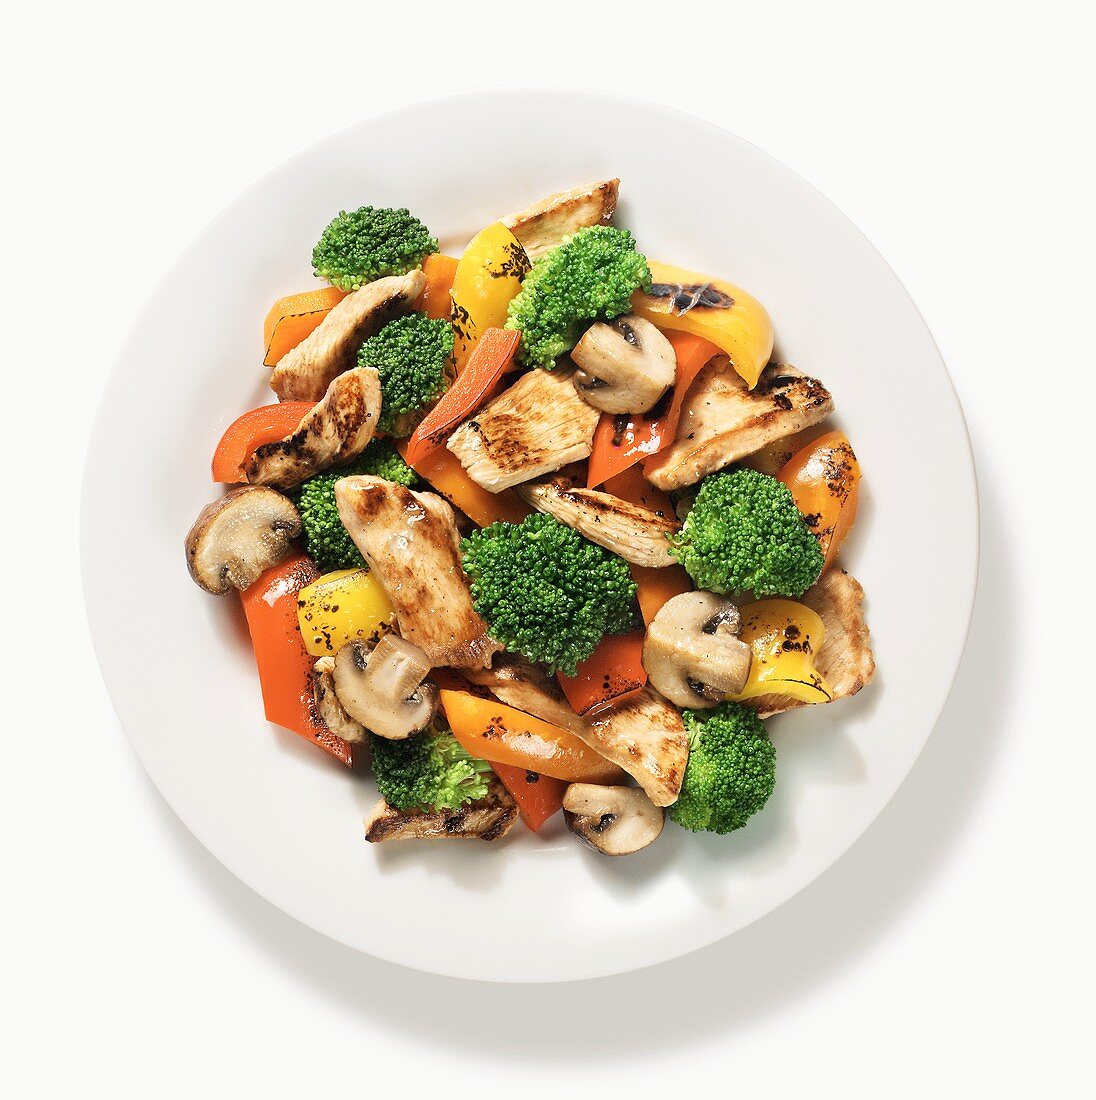 Chicken Stir Fry with Broccoli, Bell Peppers and Mushrooms